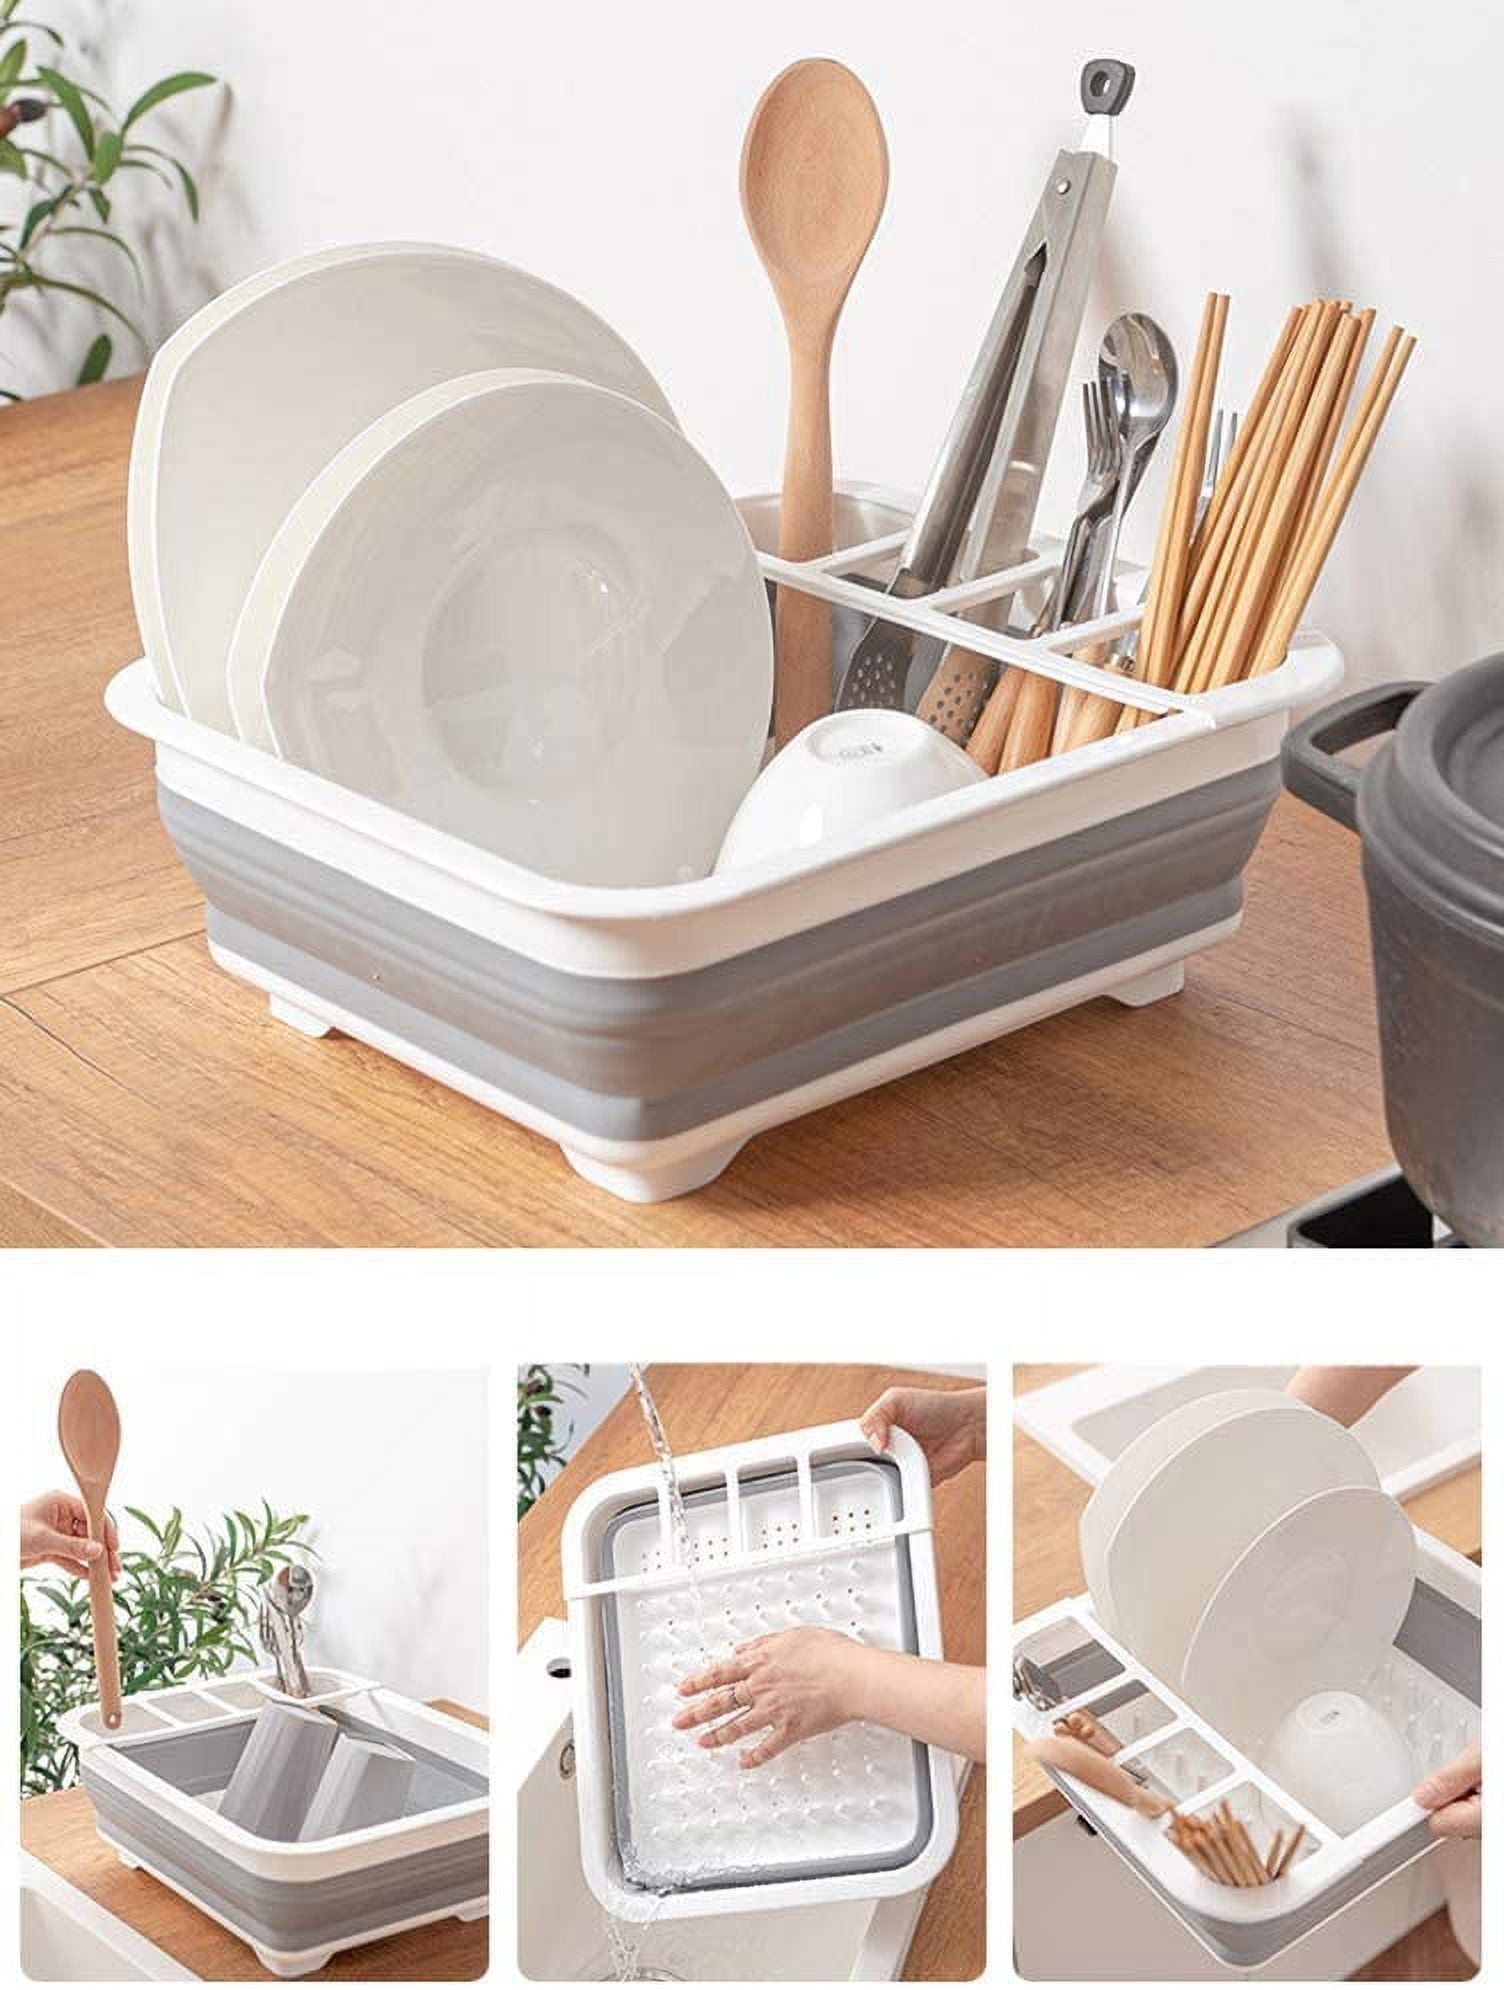 Jytue Collapsible Dish Drying Rack with Drainboard Tray Popup and Collapse  for Easy Storage Portable Kitchen Storage Organizer